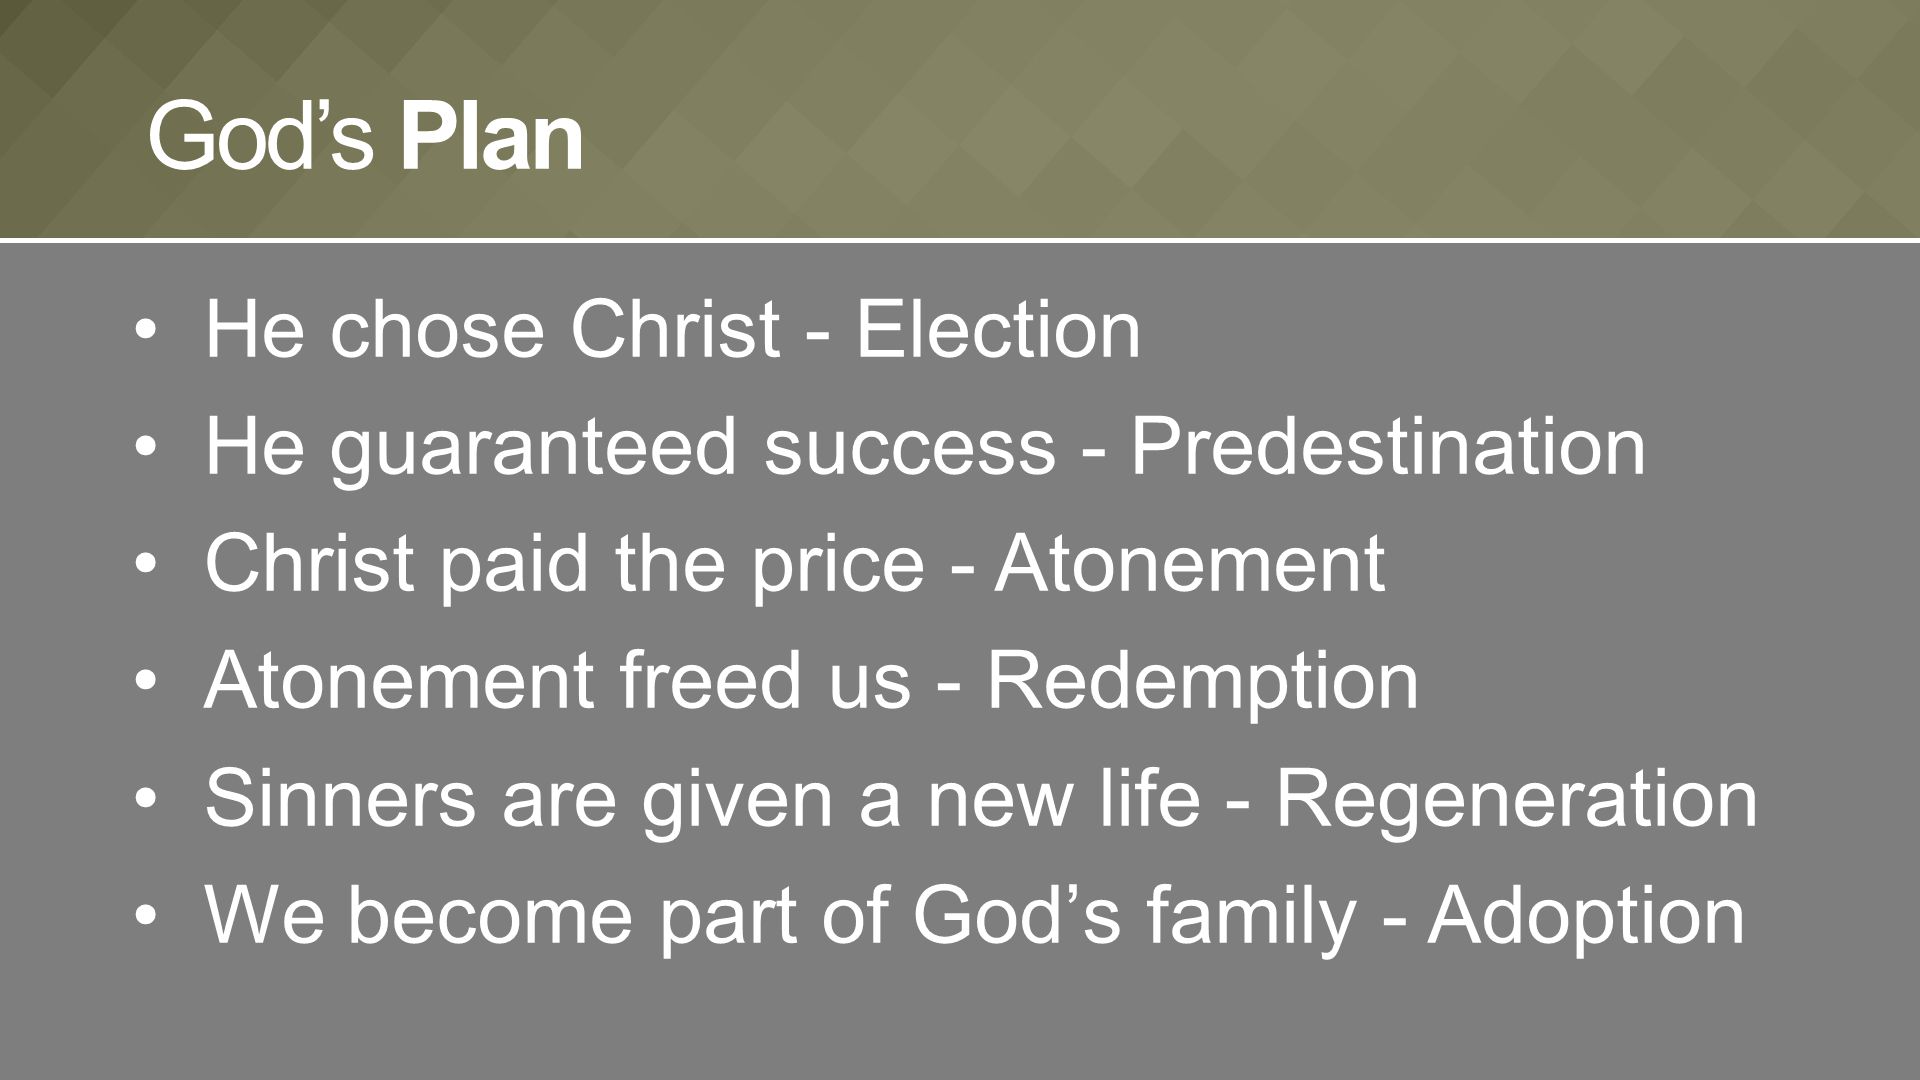 He chose Christ - Election He guaranteed success - Predestination Christ paid the price - Atonement Atonement freed us - Redemption Sinners are given a new life - Regeneration We become part of God’s family - Adoption God’s Plan